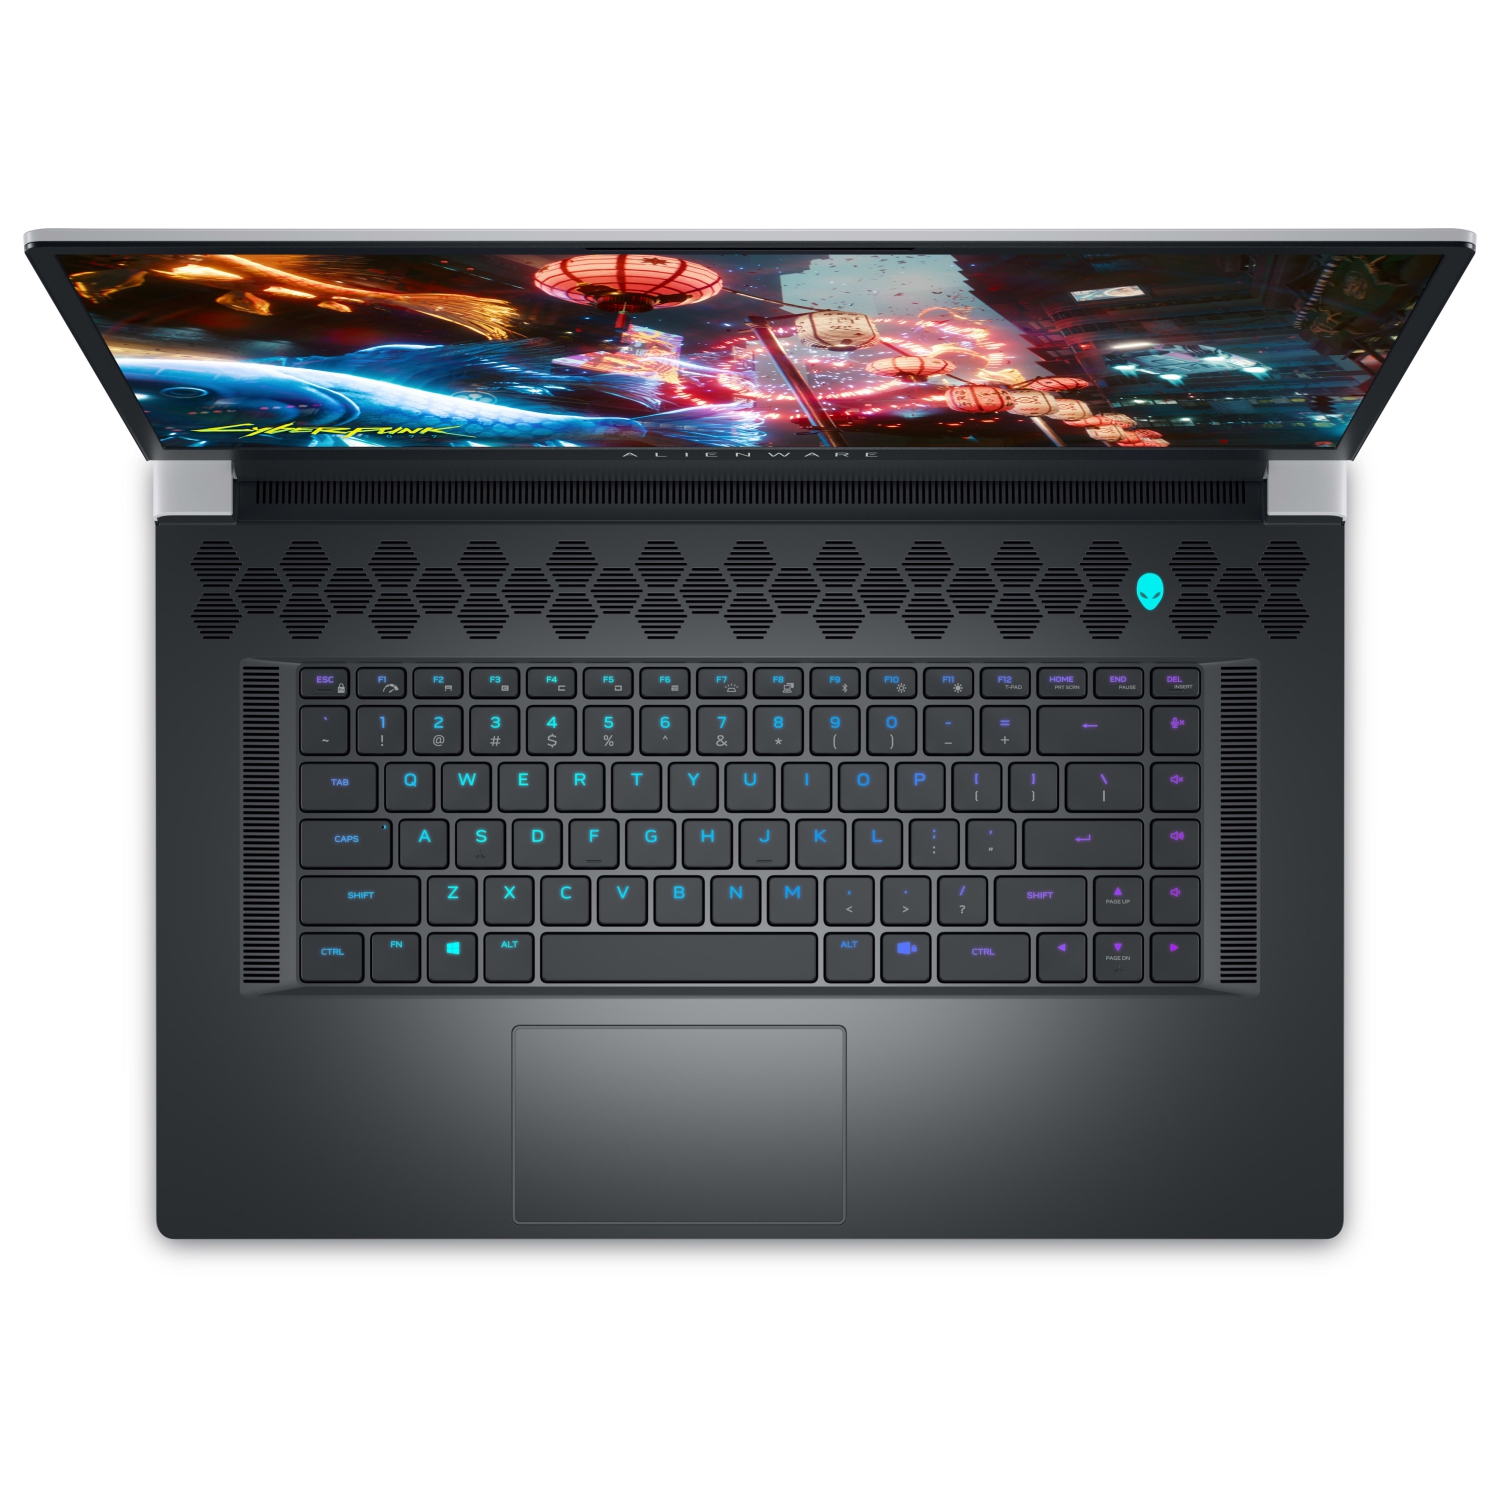 Refurbished (Excellent) – Dell Alienware X17 R2 Gaming Laptop (2022) | 17.3" QHD | Core i7 - 512GB SSD - 32GB RAM - RTX 3060 | 14 Cores @ 4.7 GHz - 12th Gen CPU - 12GB GDDR6